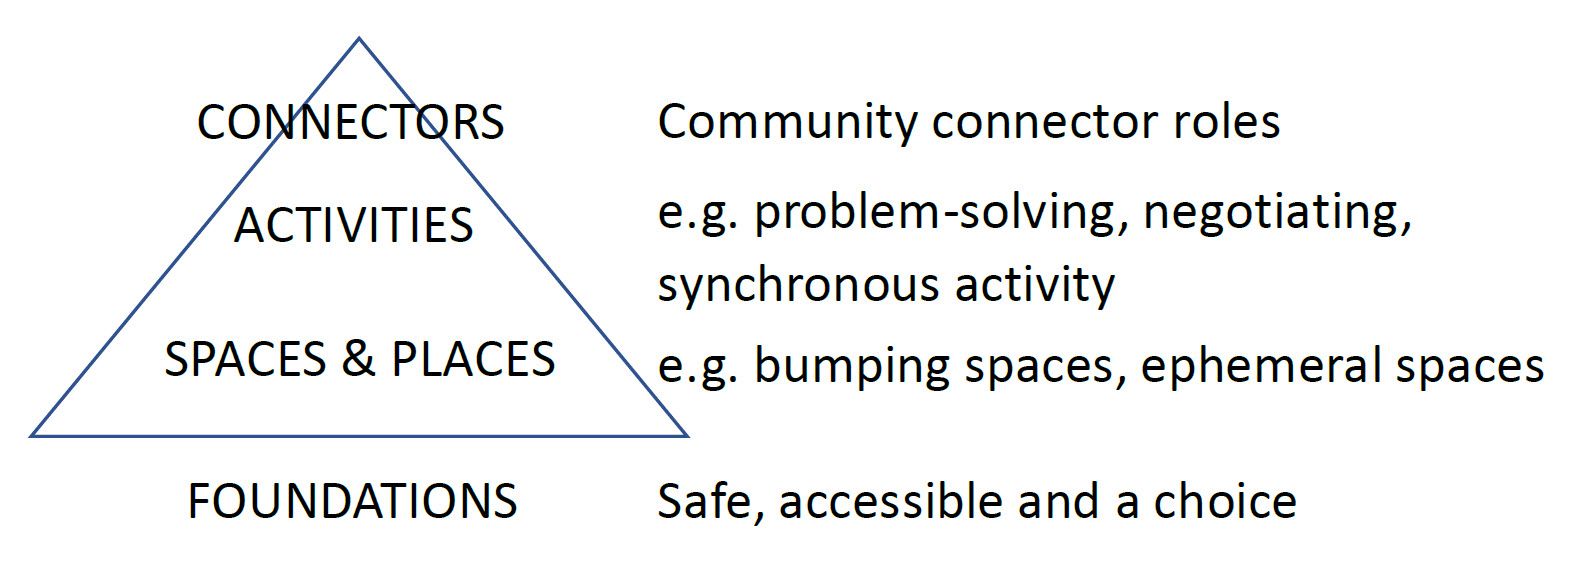 CONNECTORS: Community connector roles; ACTIVITIES: e.g. problem-solving, negotiating, synchronous activity; SPACES & PLACES: e.g. bumping spaces, ephemeral spaces; FOUNDATIONS: safe, accessible and a choice.